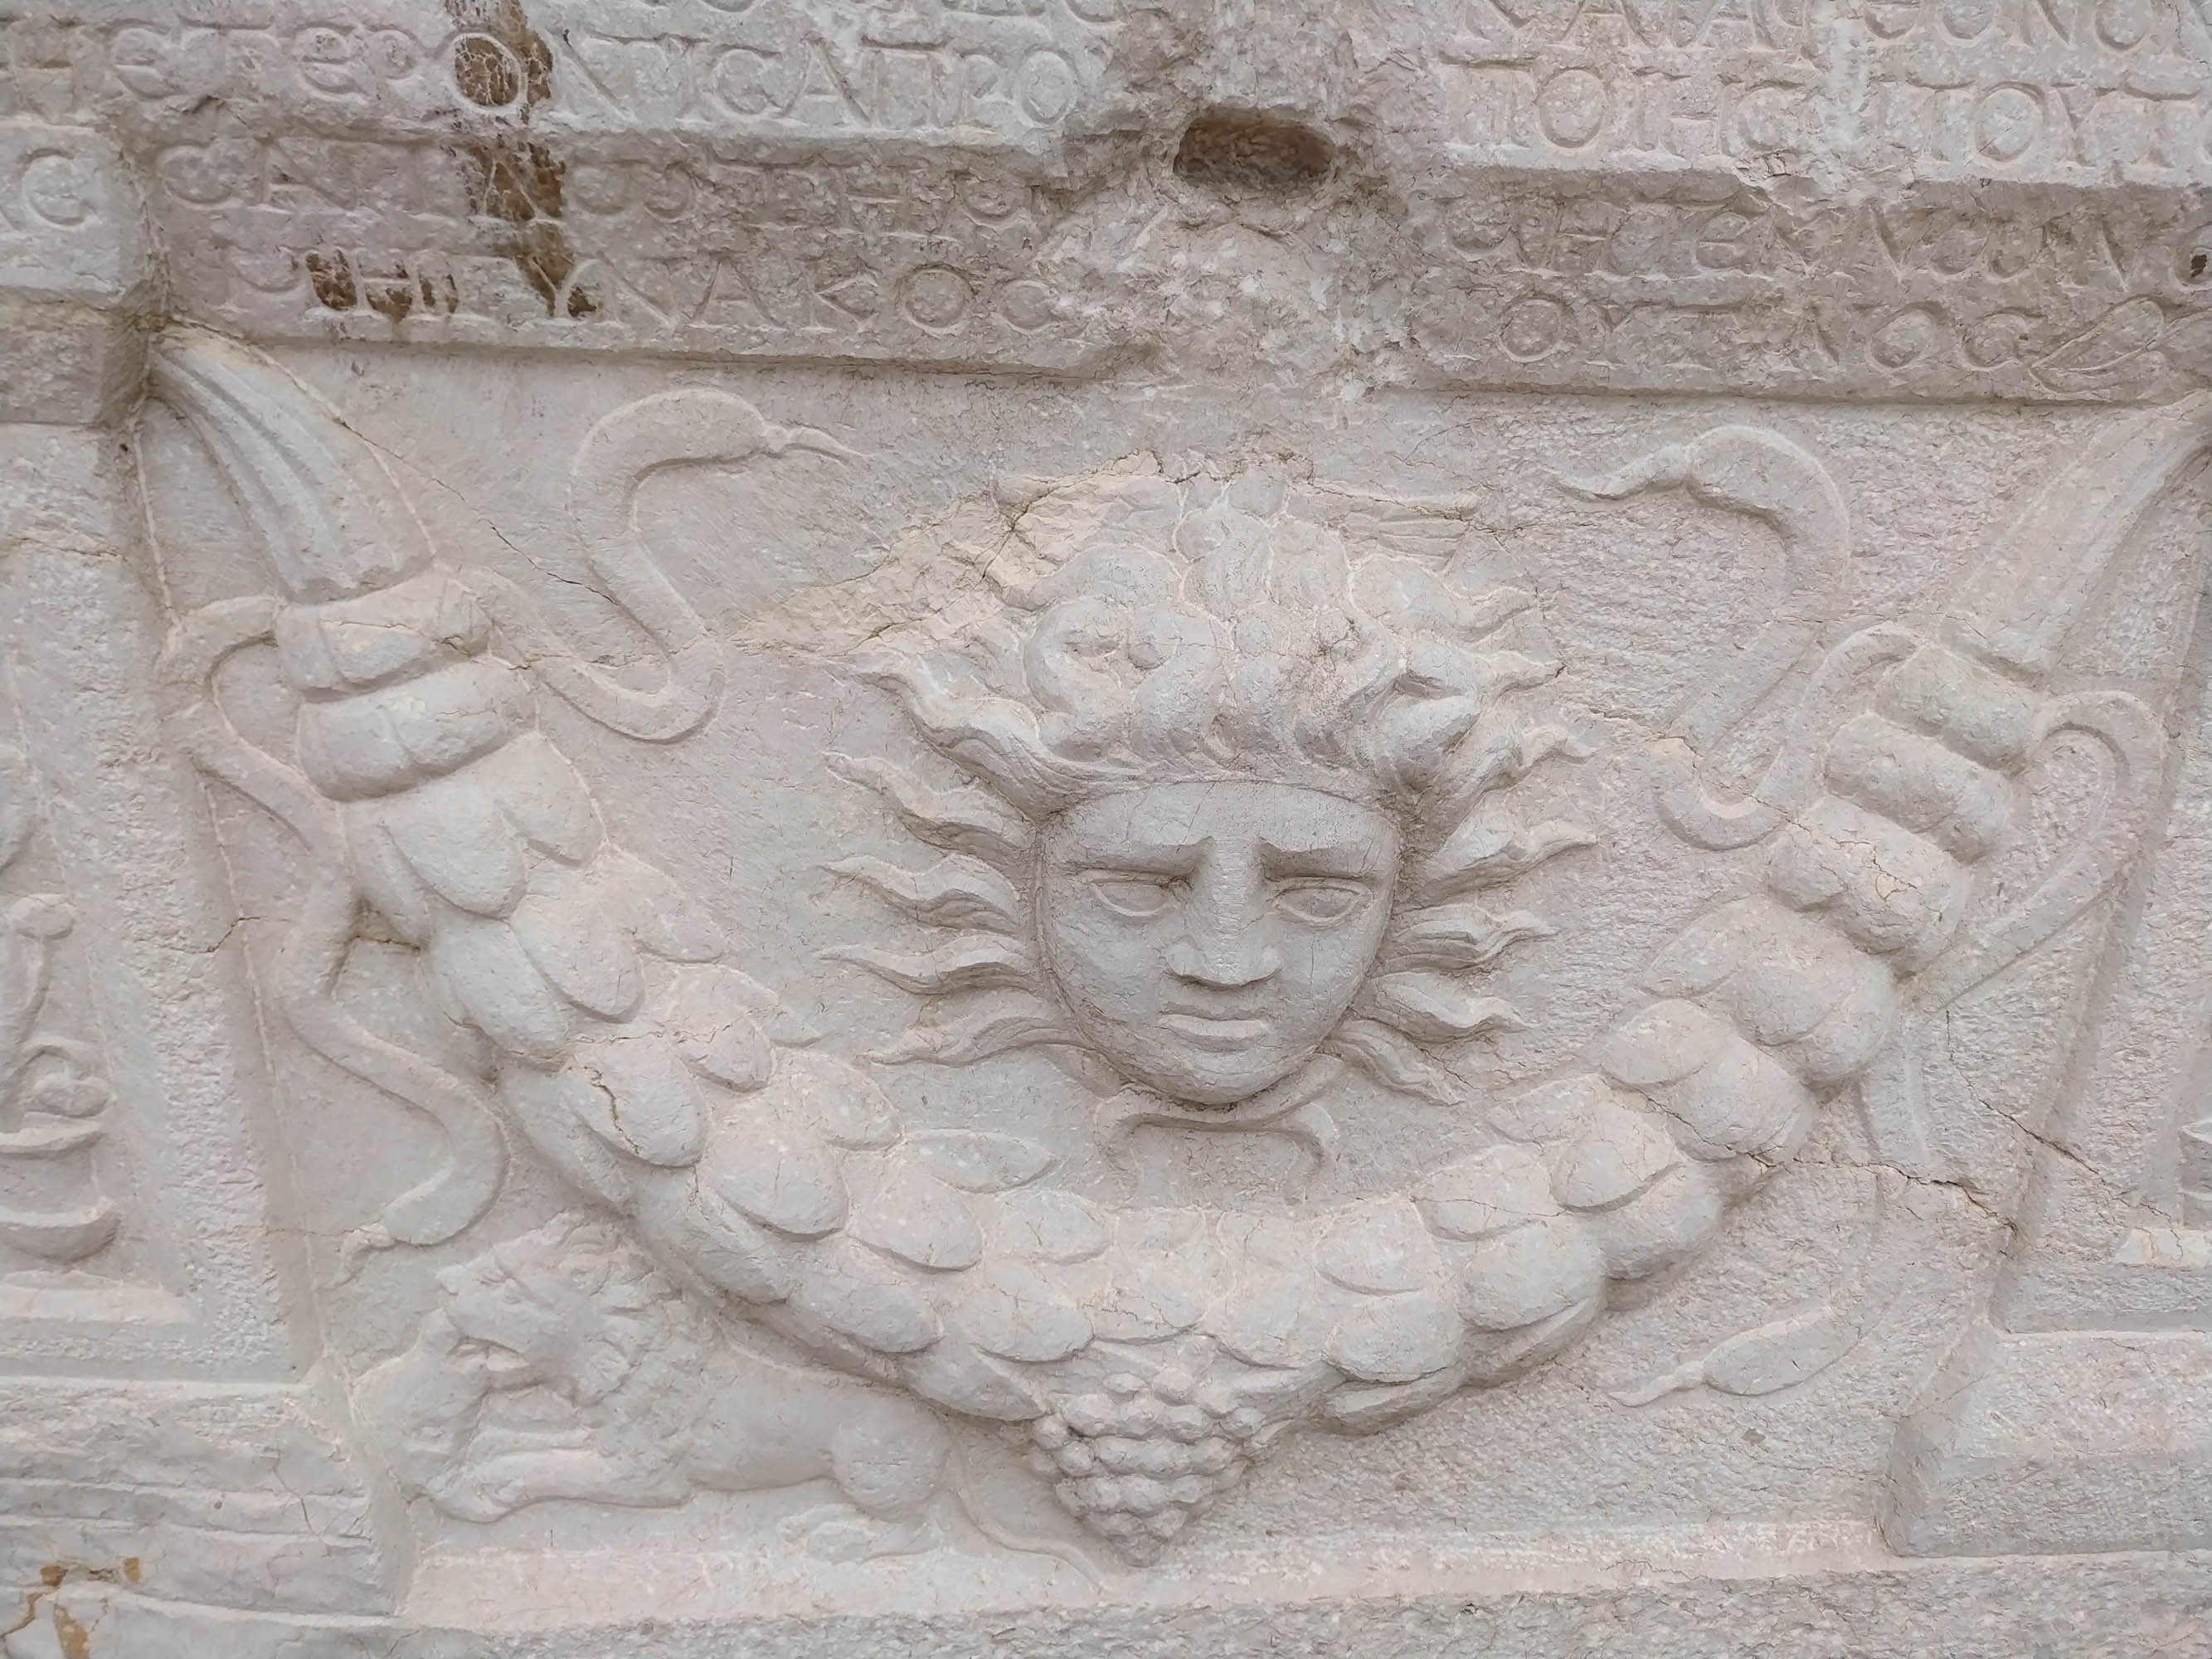 A close-up look of the Medussa relief on the sarcophagus. (DHA Photo)